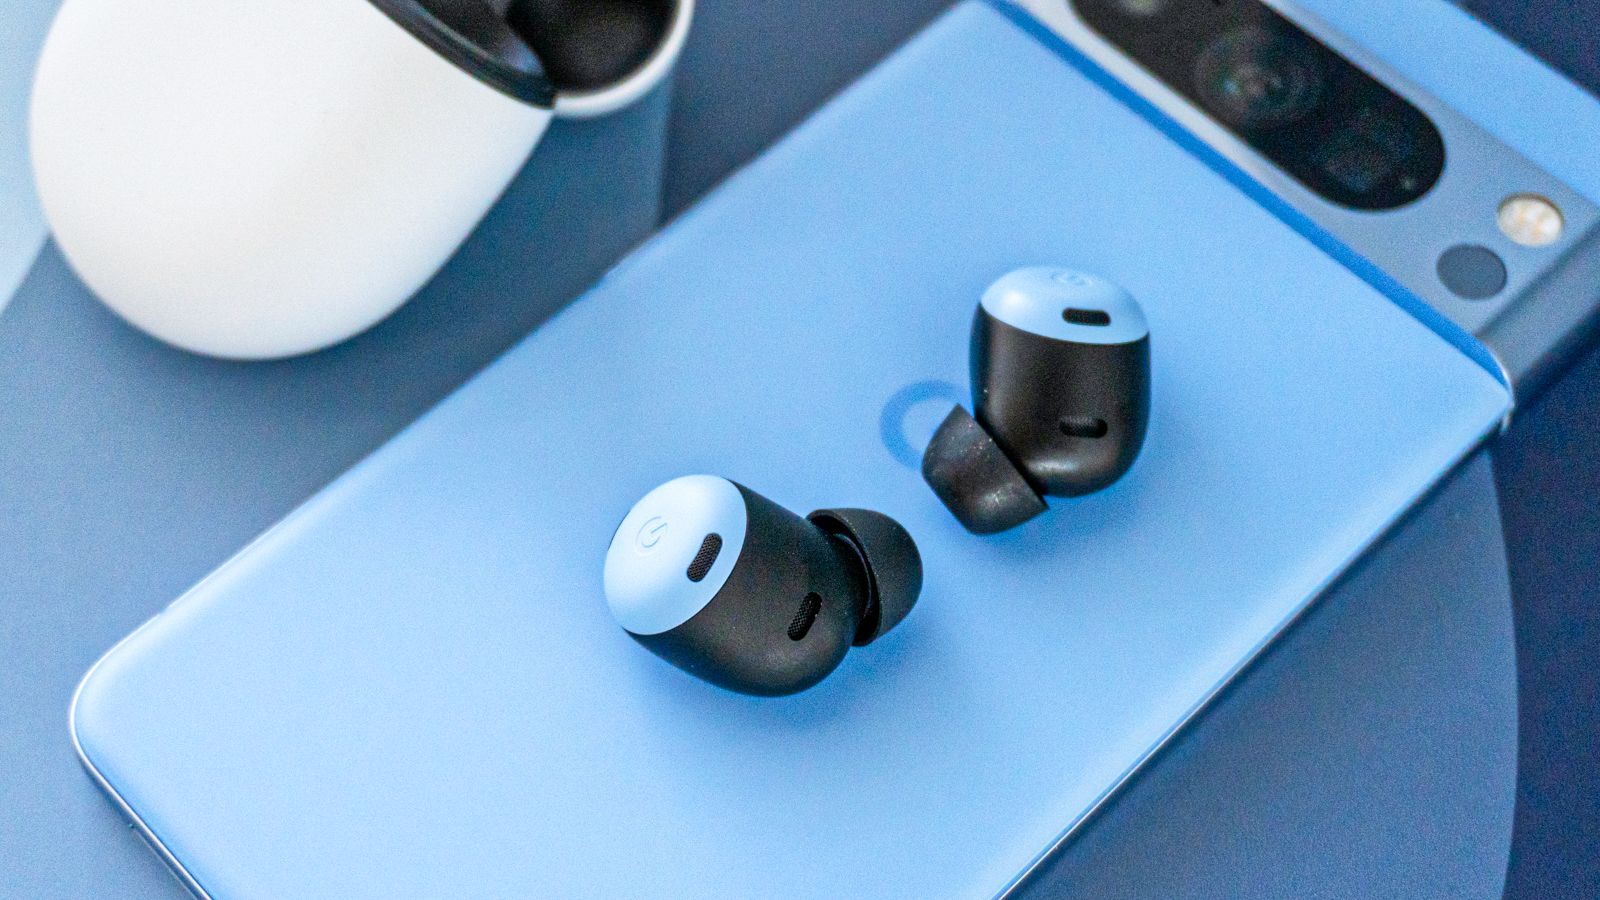 Google adds Blue and Porcelain colors to the Pixel Buds Pro -   news